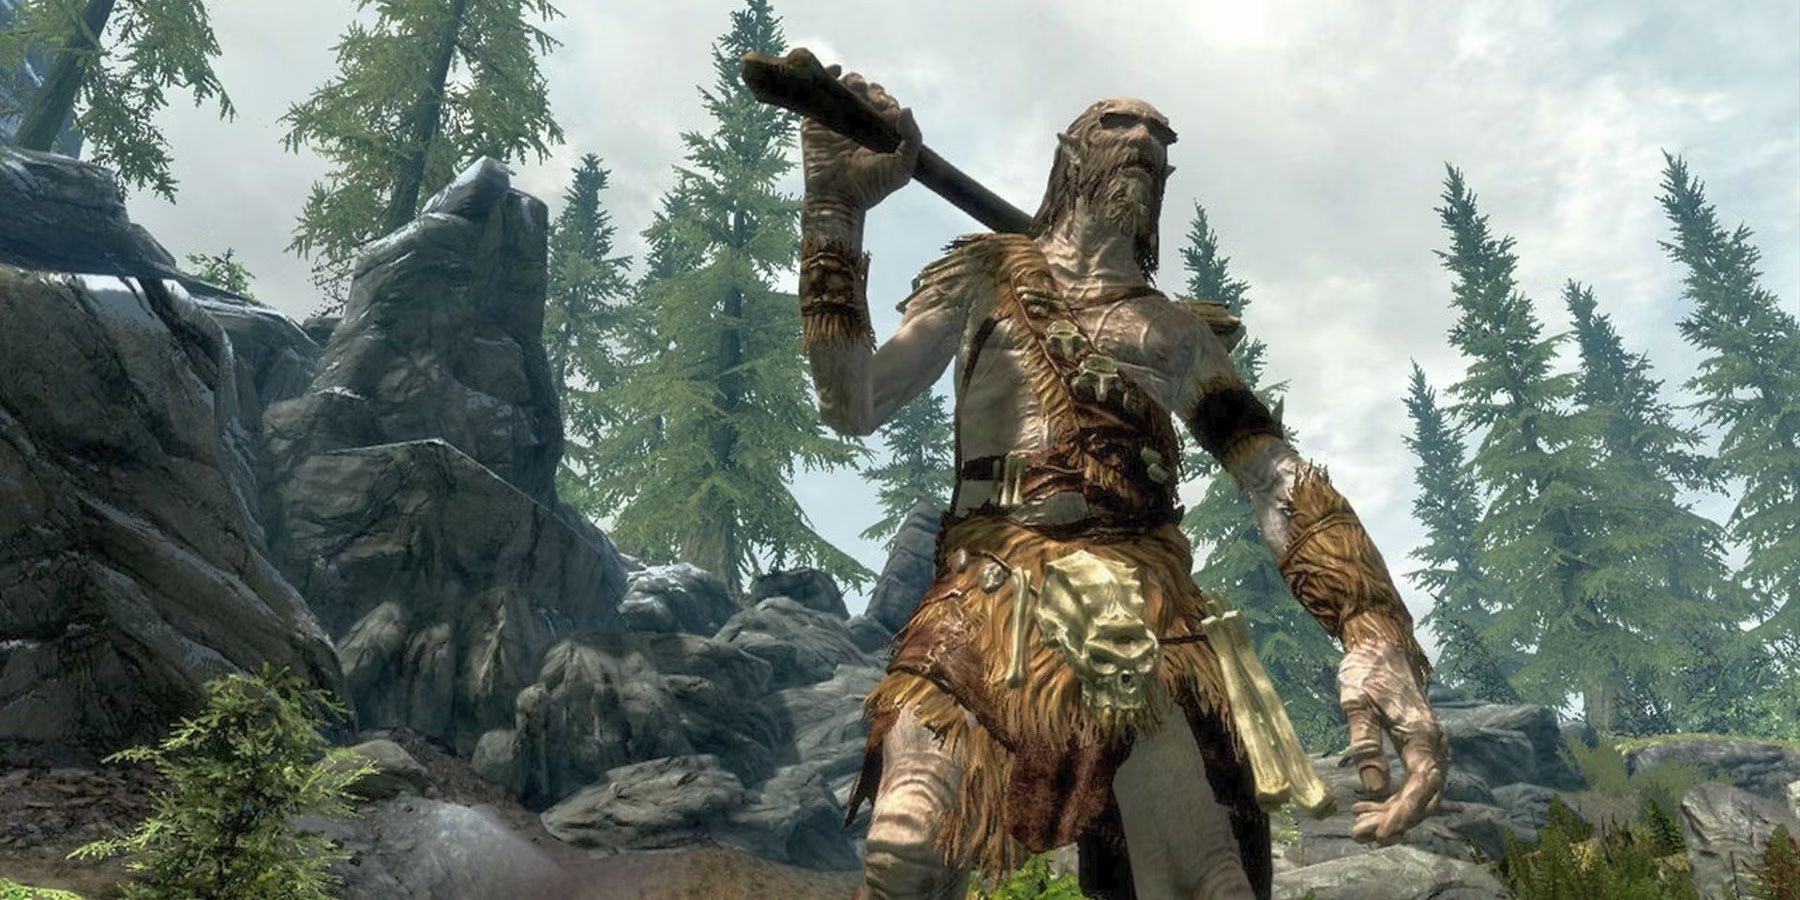 Skyrim Players Debate Which Enemies Are the Most Annoying to Fight in the Game